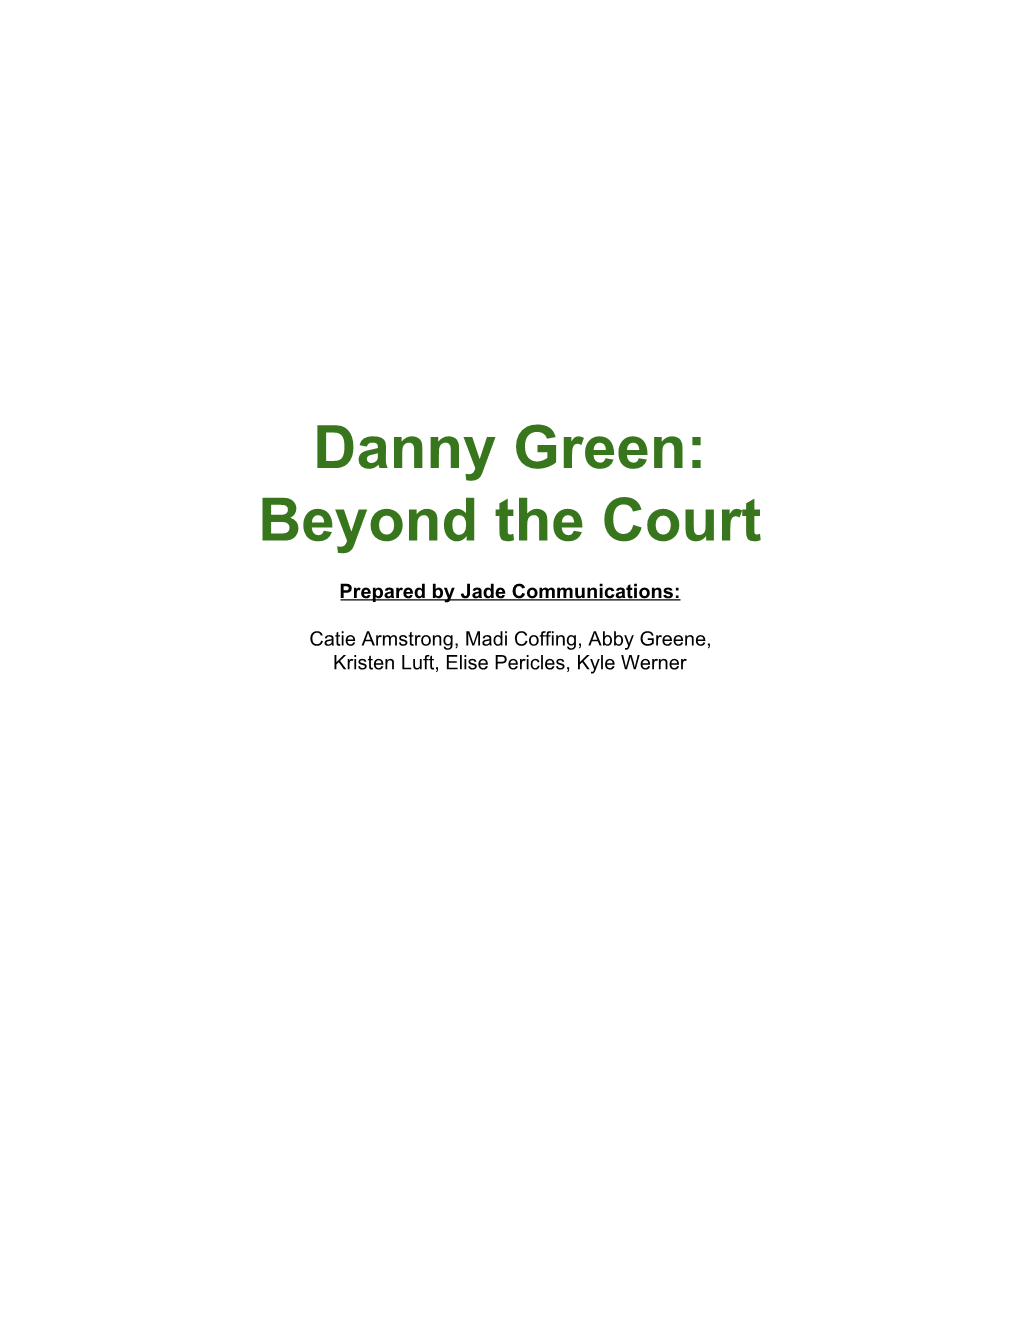 Danny Green: Beyond the Court